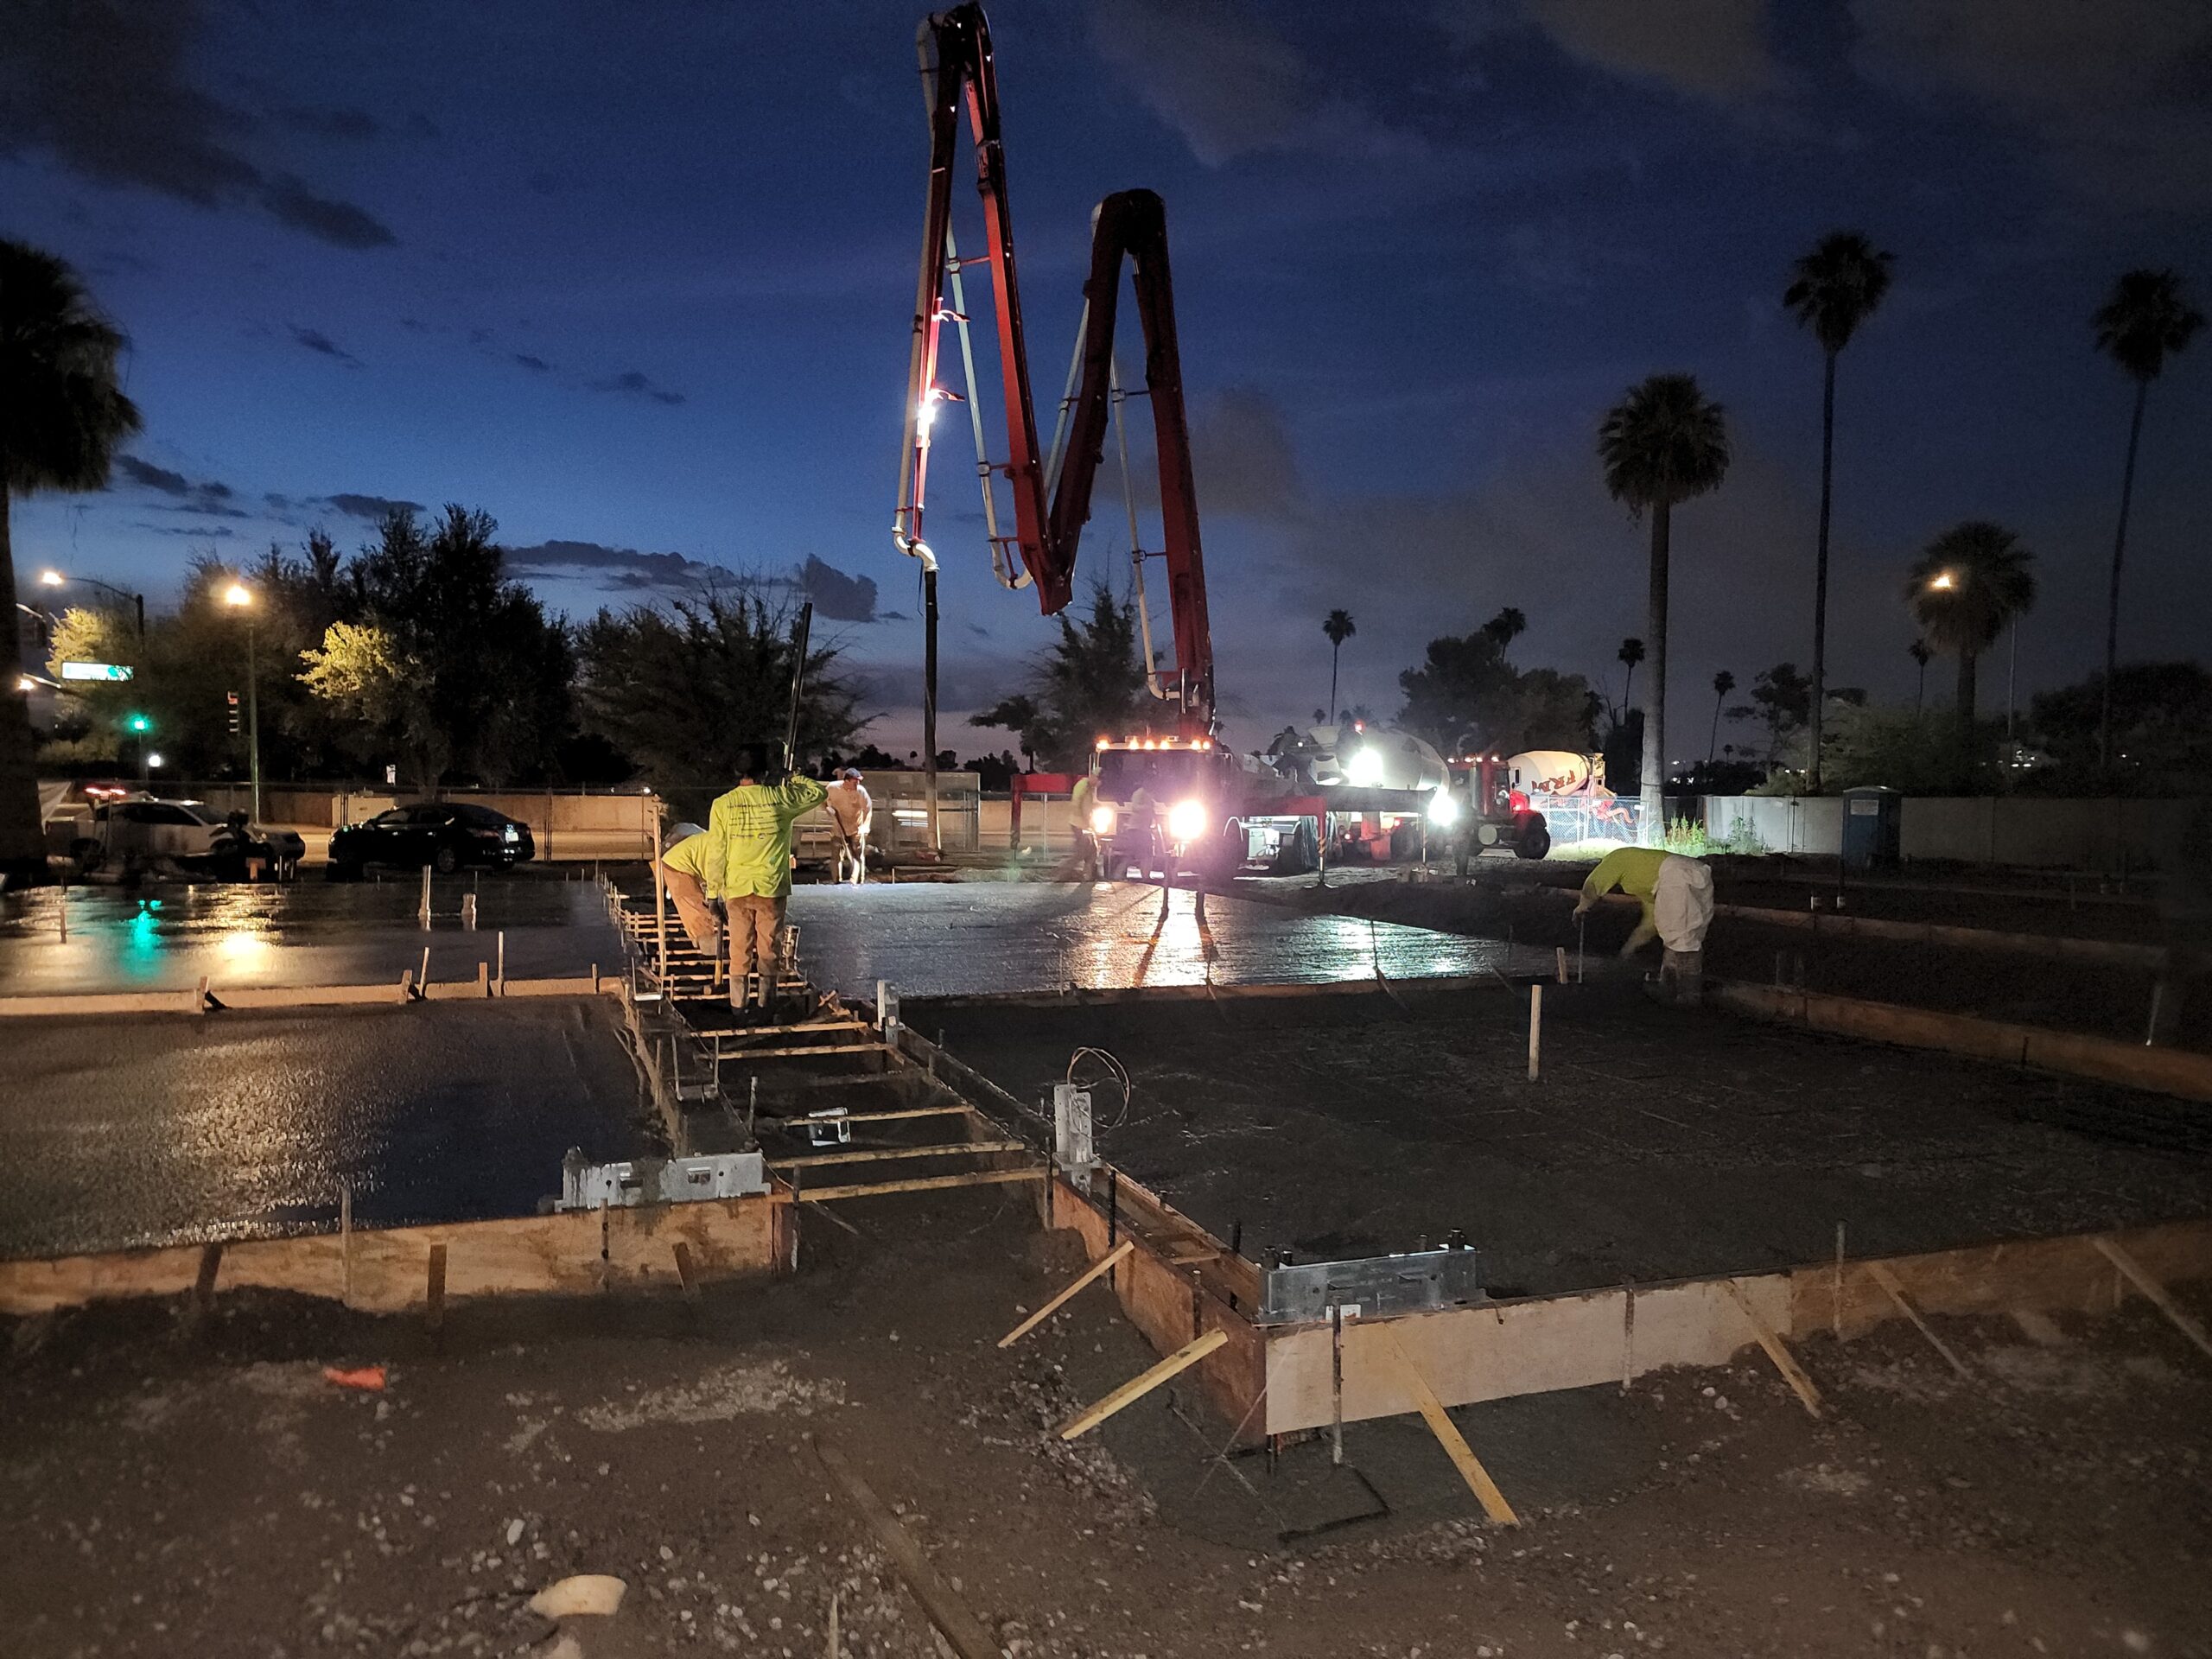 Go, go, go - One building foundation for the townhome development is already poured and curing